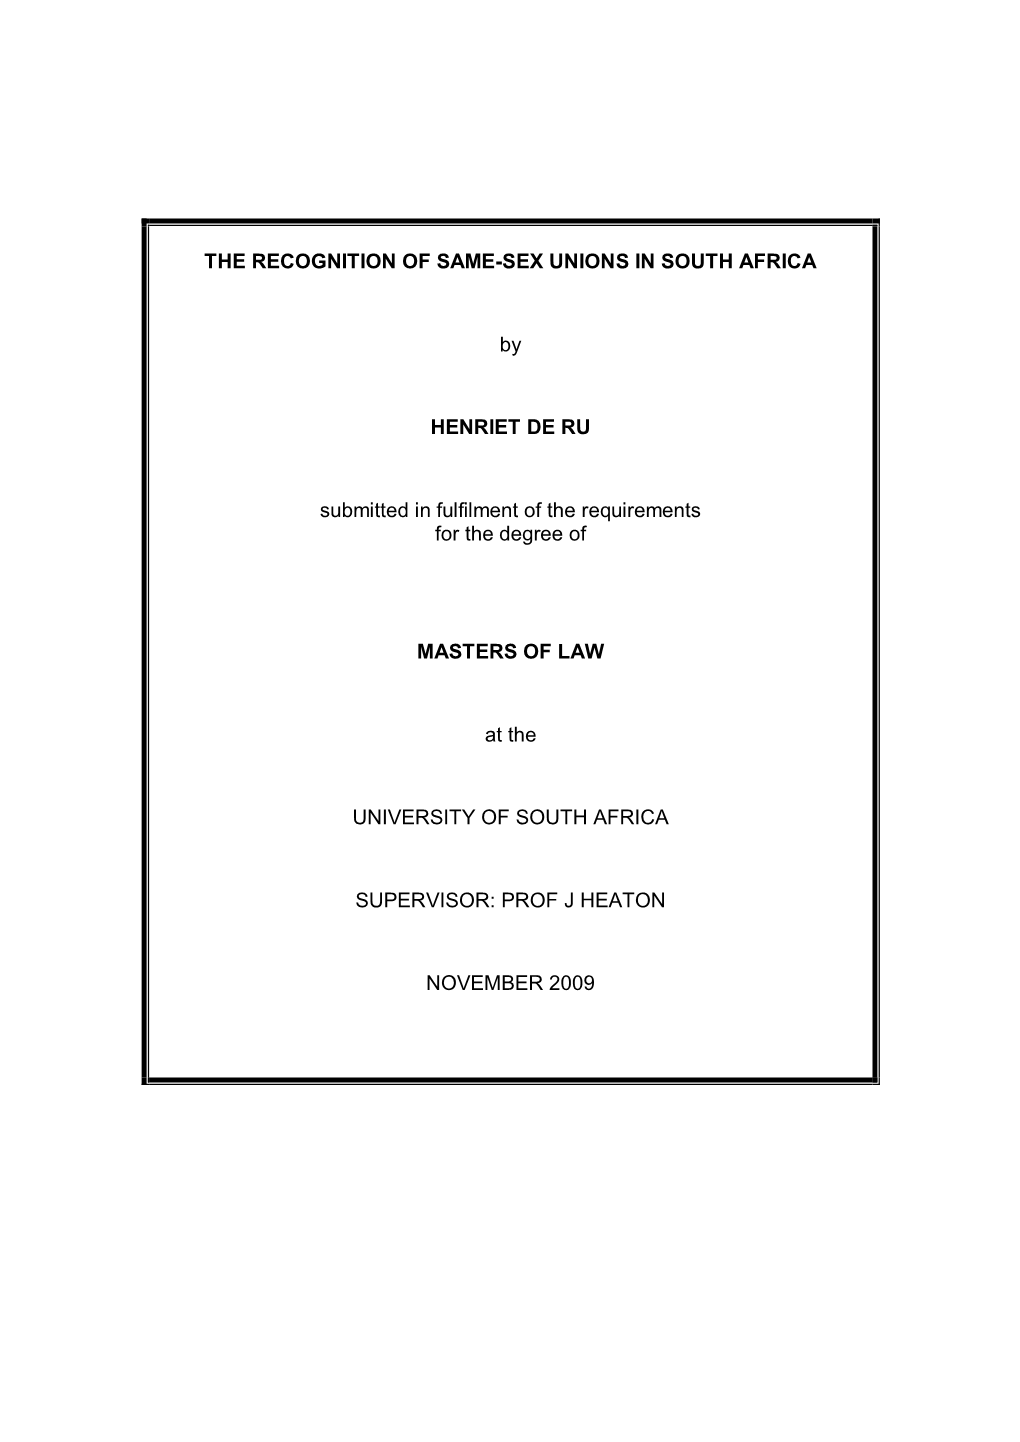 The Recognition of Same-Sex Unions in South Africa